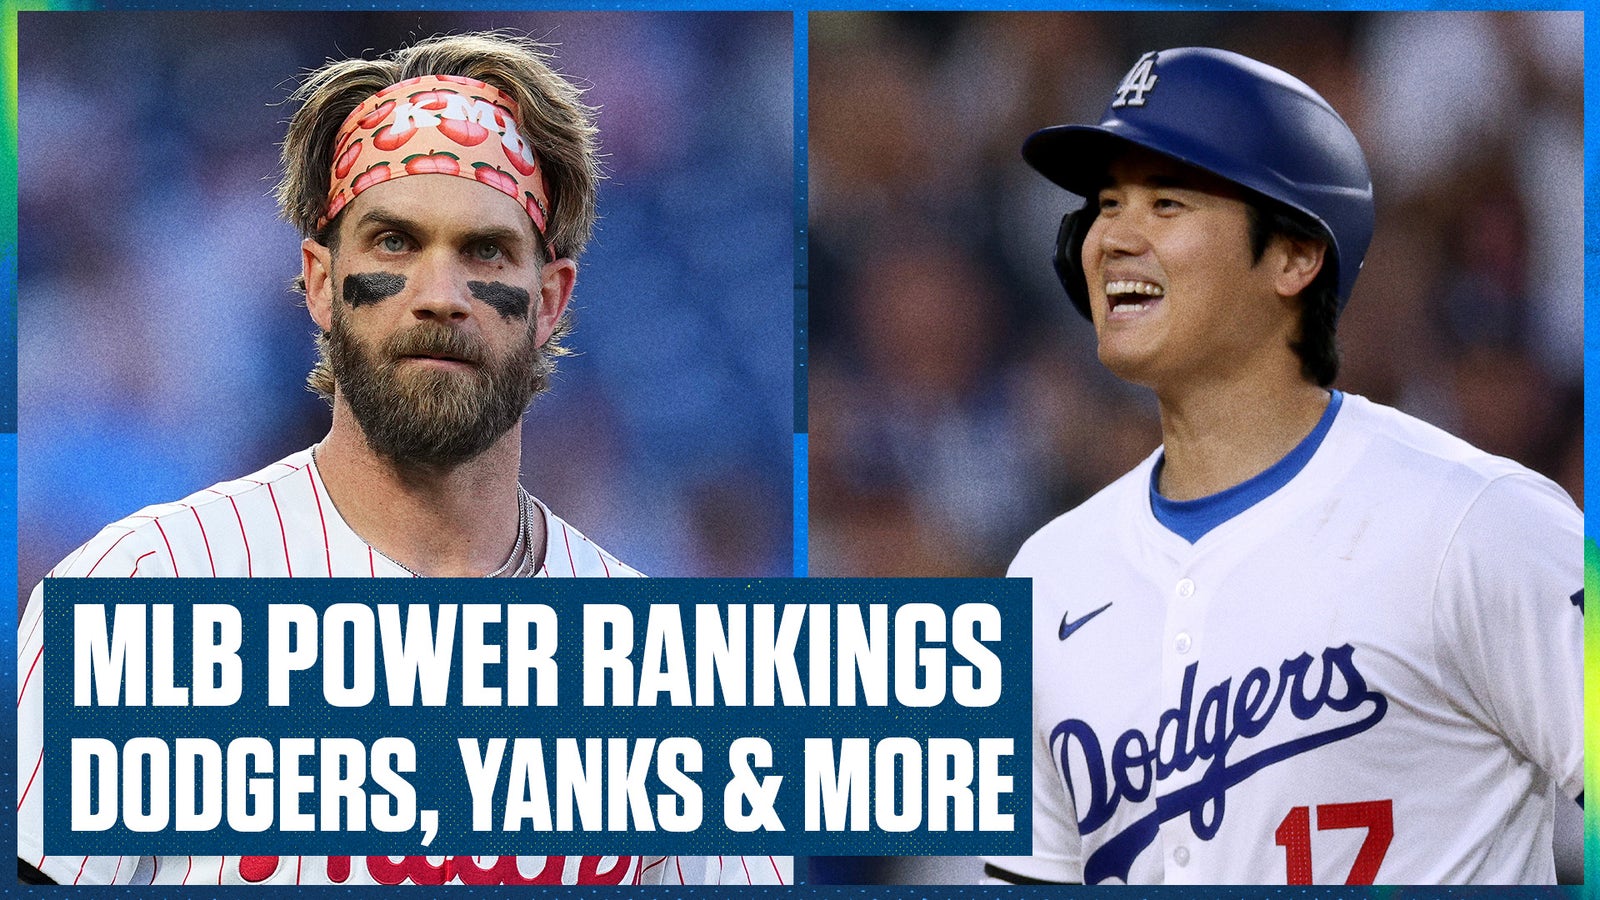 MLB Power Rankings: Yankees, Phillies, Dodgers battle for the No. 1 spot